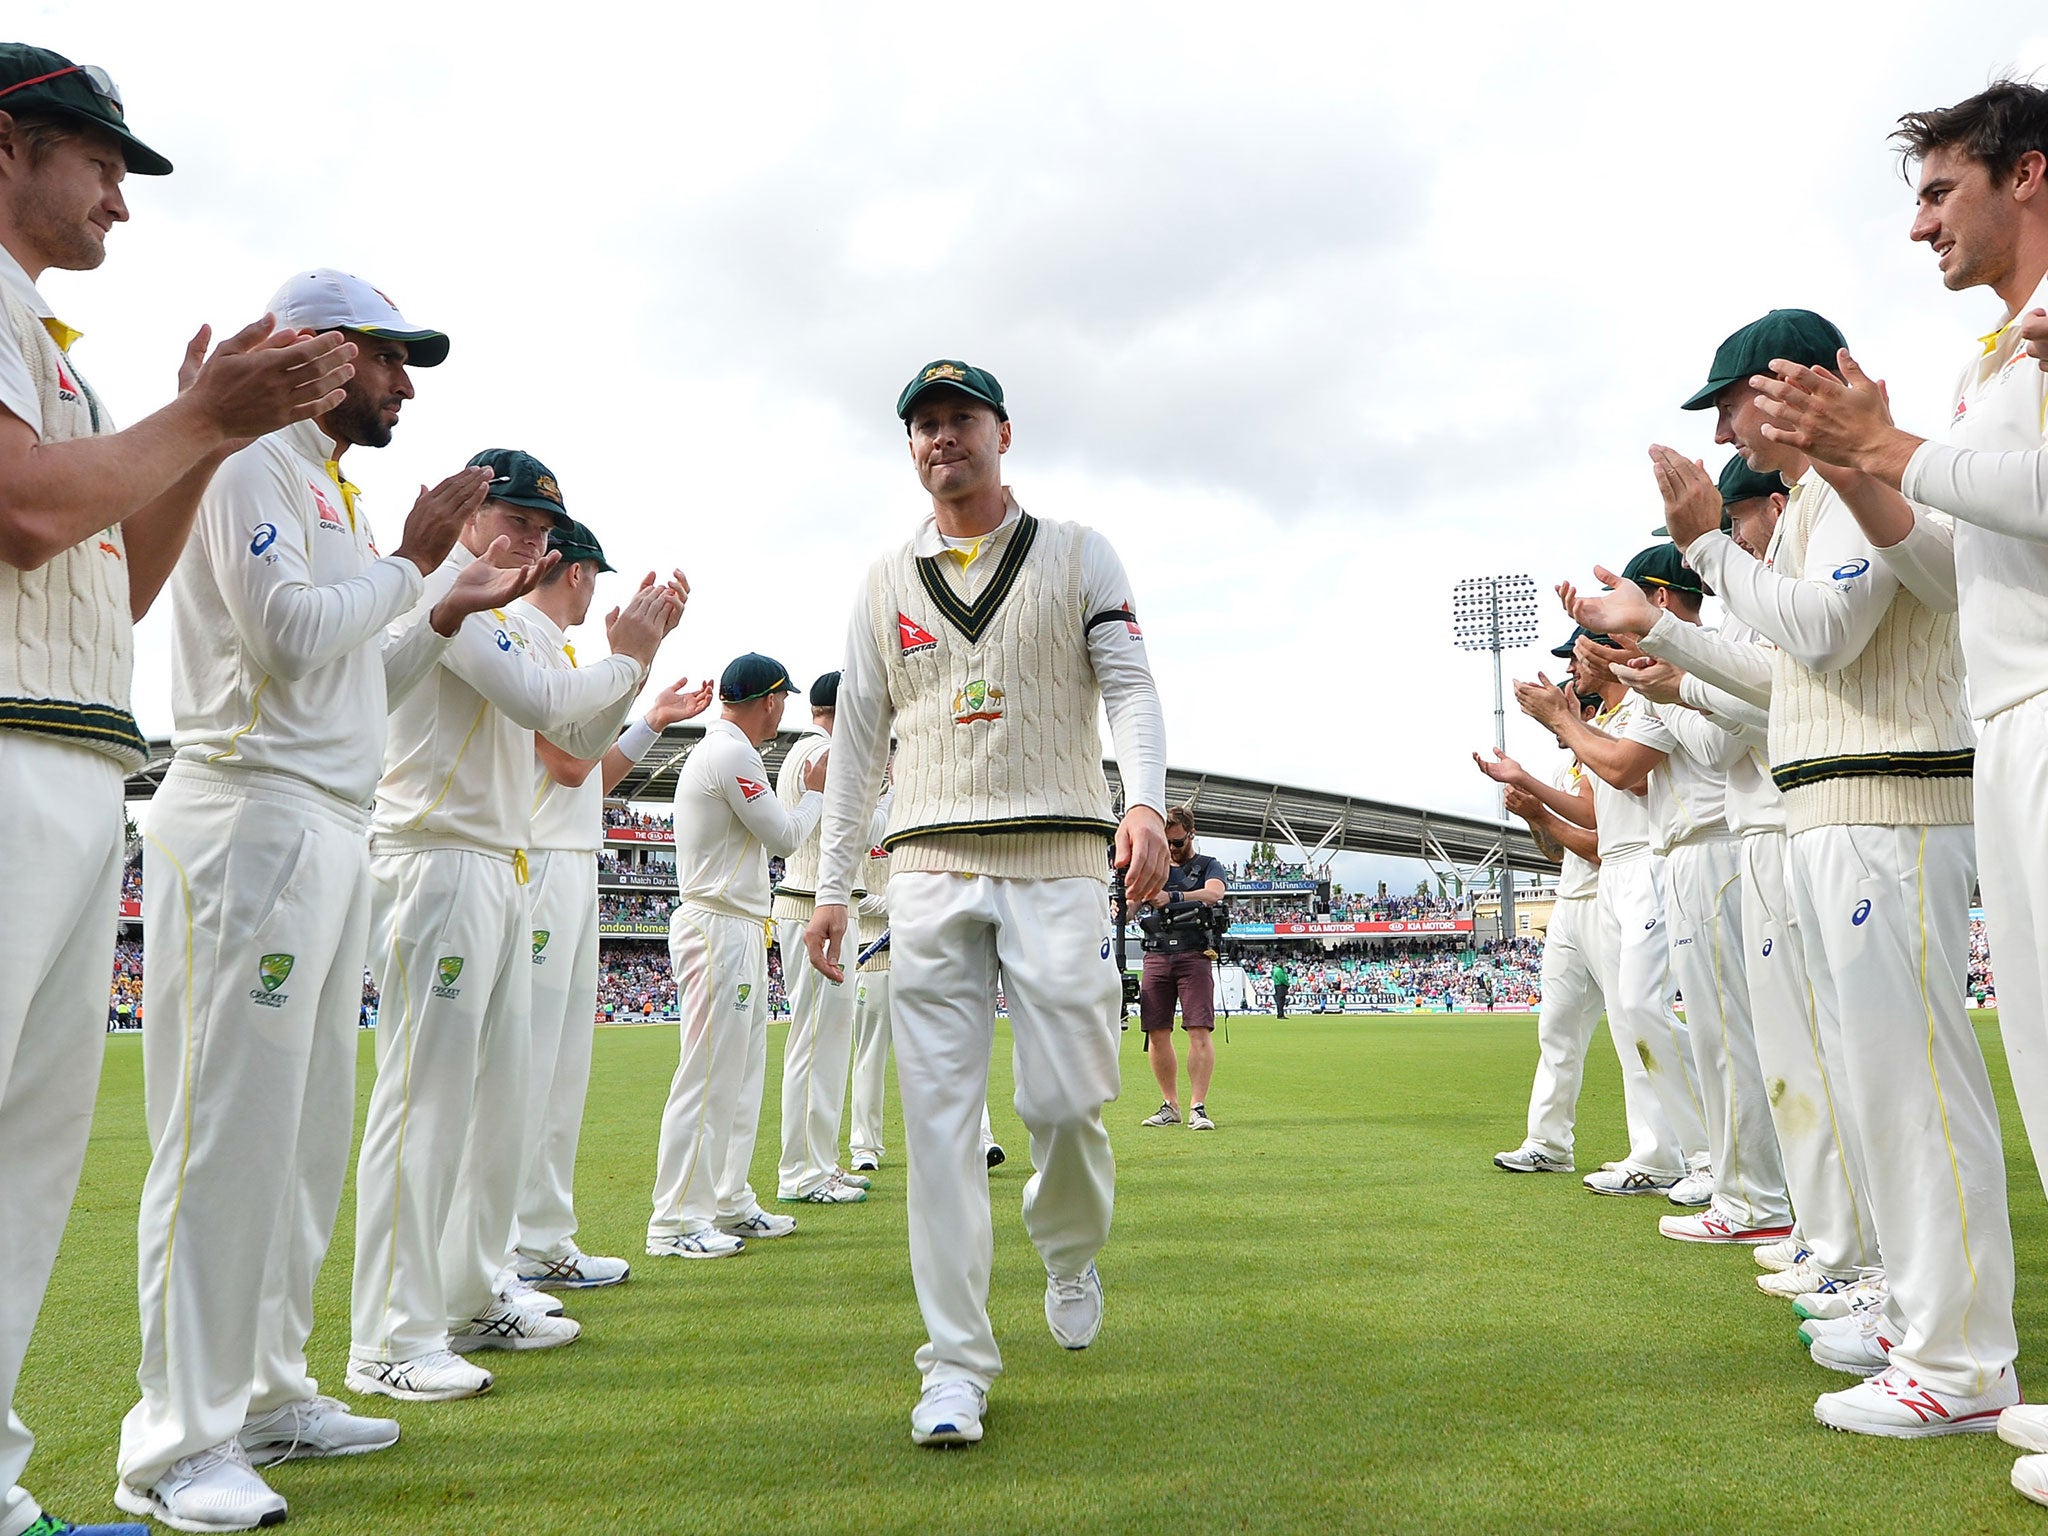 Australia's captain Michael Clarke receives a guard of honour from his Australia teammates as he leaves the field after Australia wrap up the game on the fourth day of the fifth Ashes cricket test match between England and Australia at The Oval